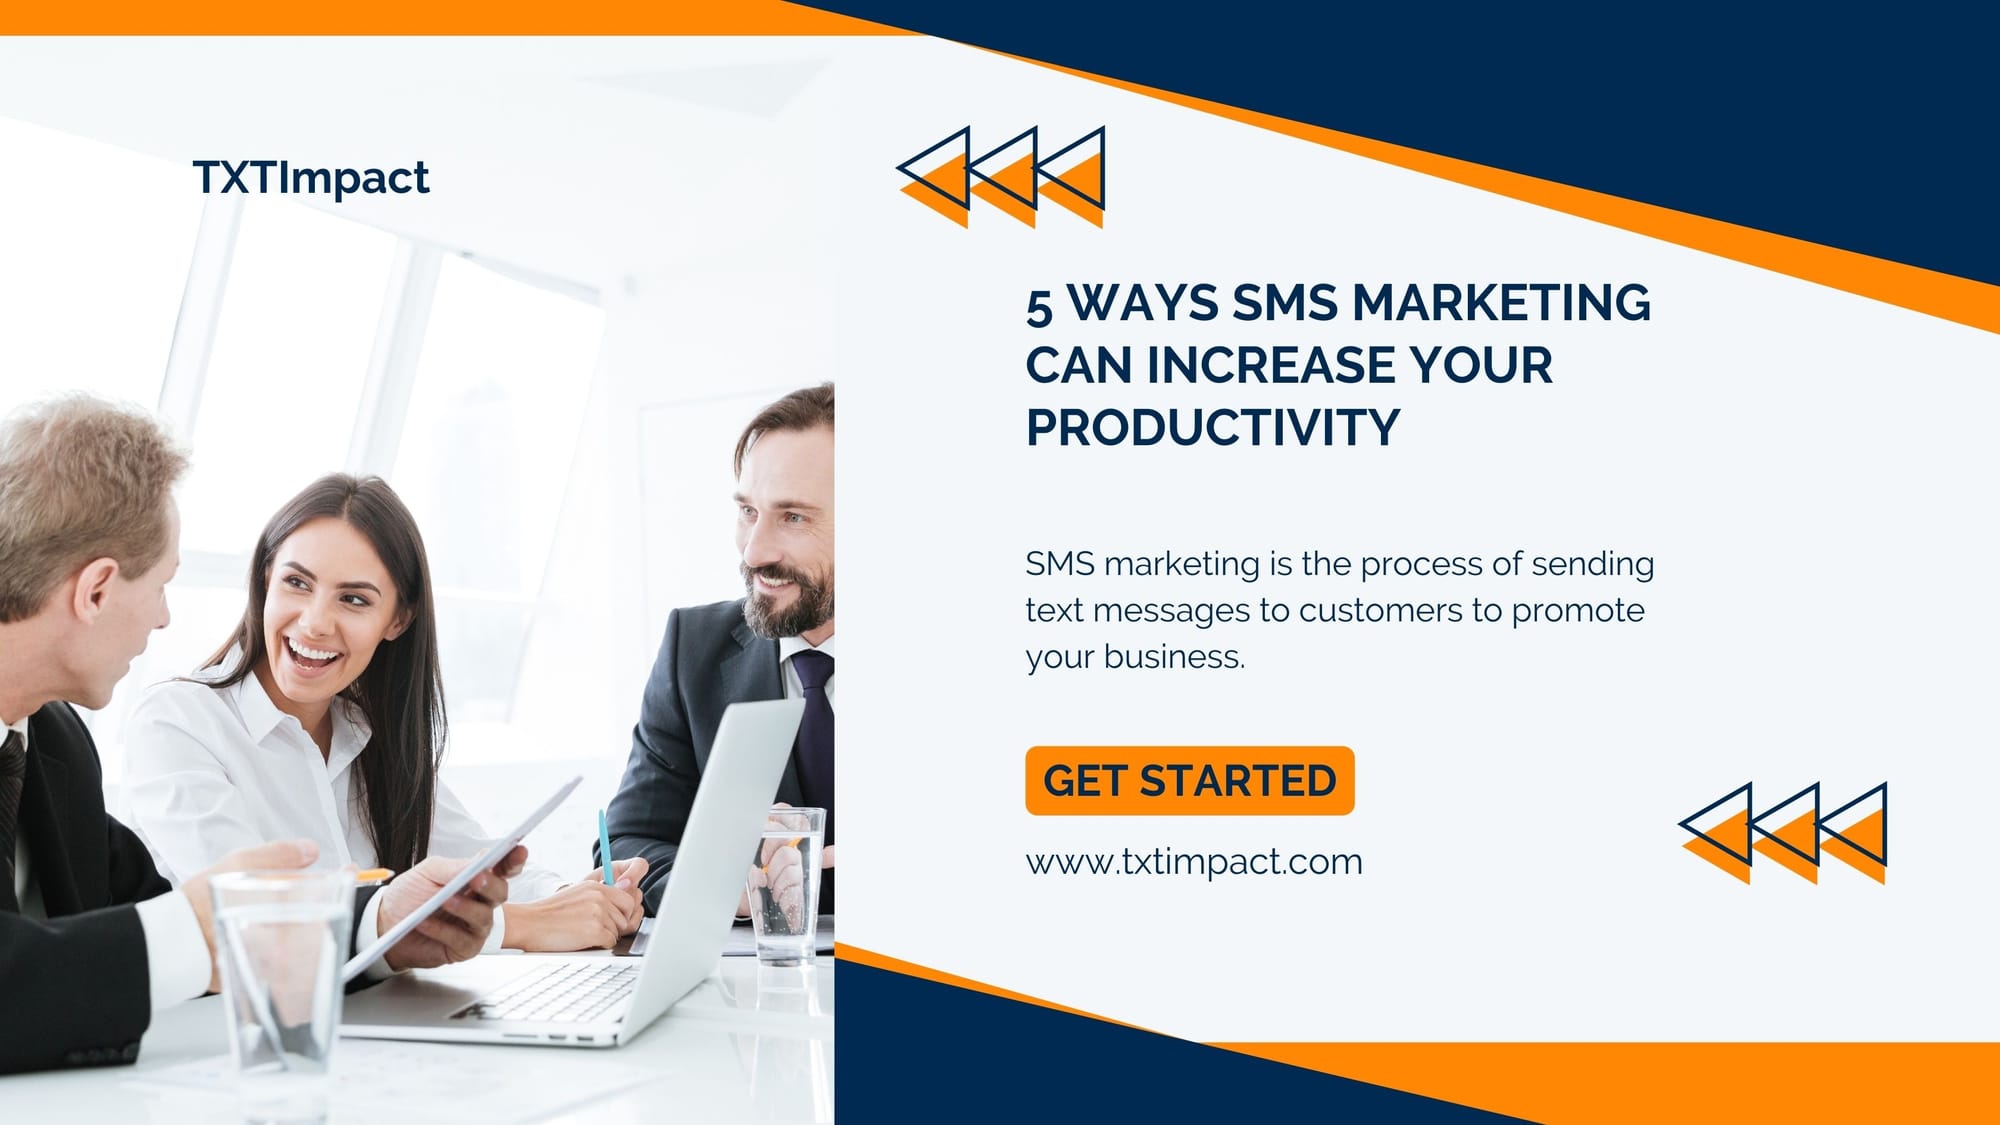 5 Ways SMS Marketing Can Increase Your Productivity  (2).jpg